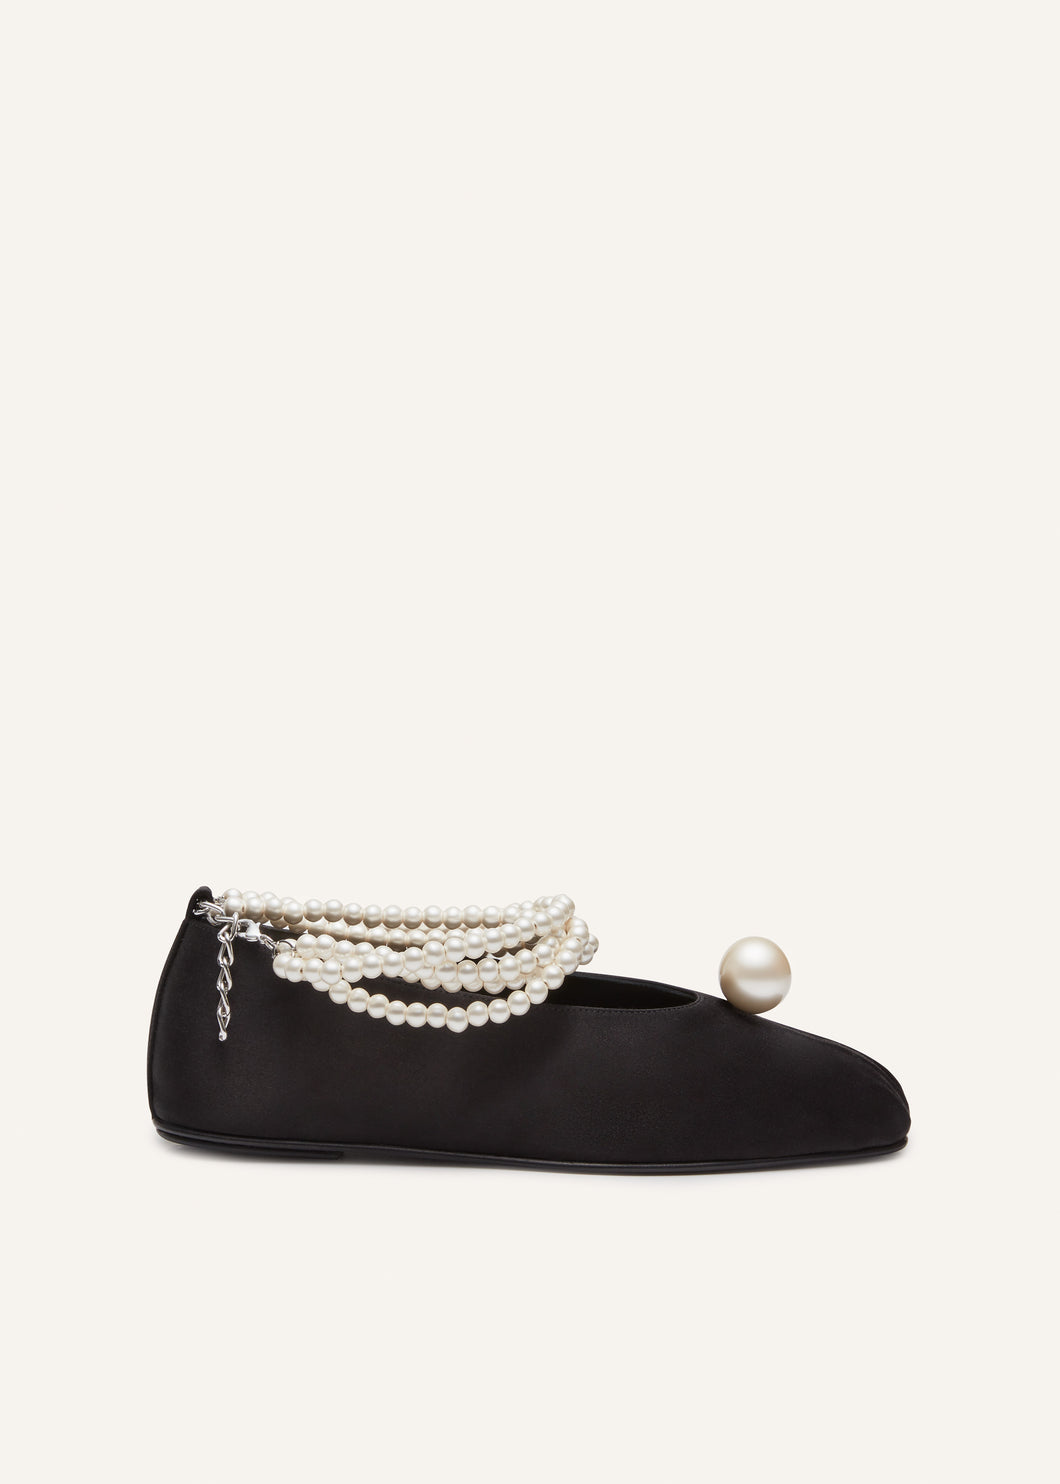 Mother of pearl ballet flats in black satin